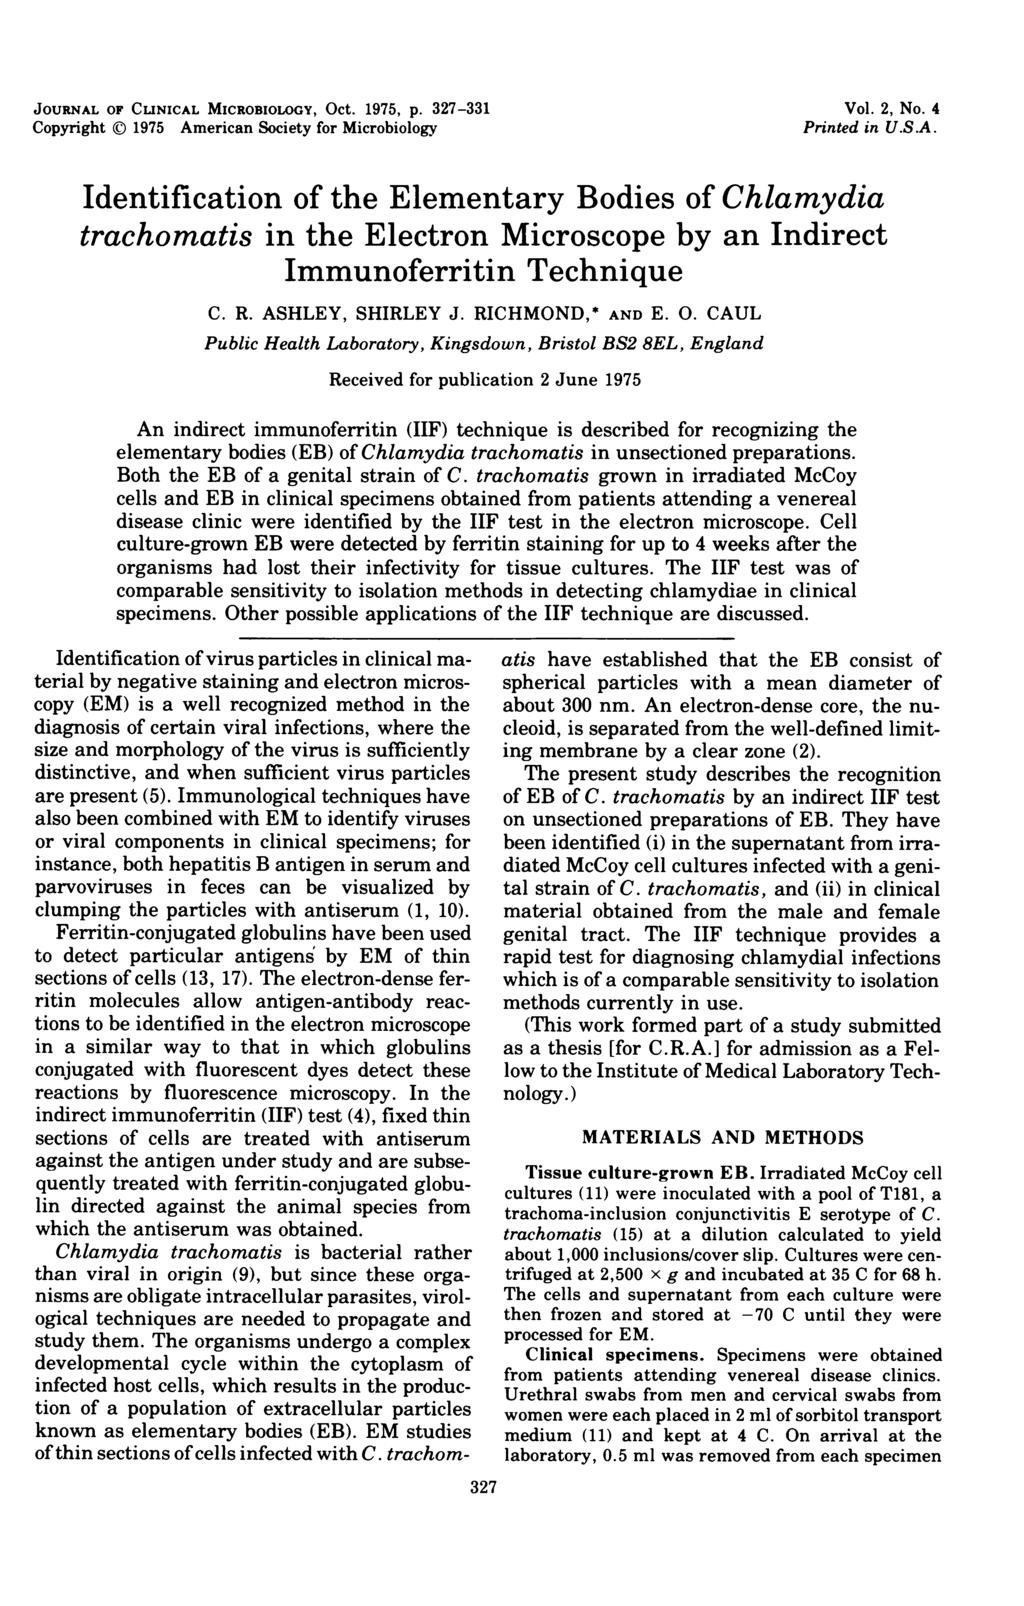 JOURNAL OF CLINICAL MICROBIOLOGY, Oct. 1975, p. 327-331 Copyright (D 1975 American Society for Microbiology Vol. 2, No. 4 Printed in U.S.A. Identification of the Elementary Bodies of Chlamydia trachomatis in the Electron Microscope by an Indirect Immunoferritin Technique C.